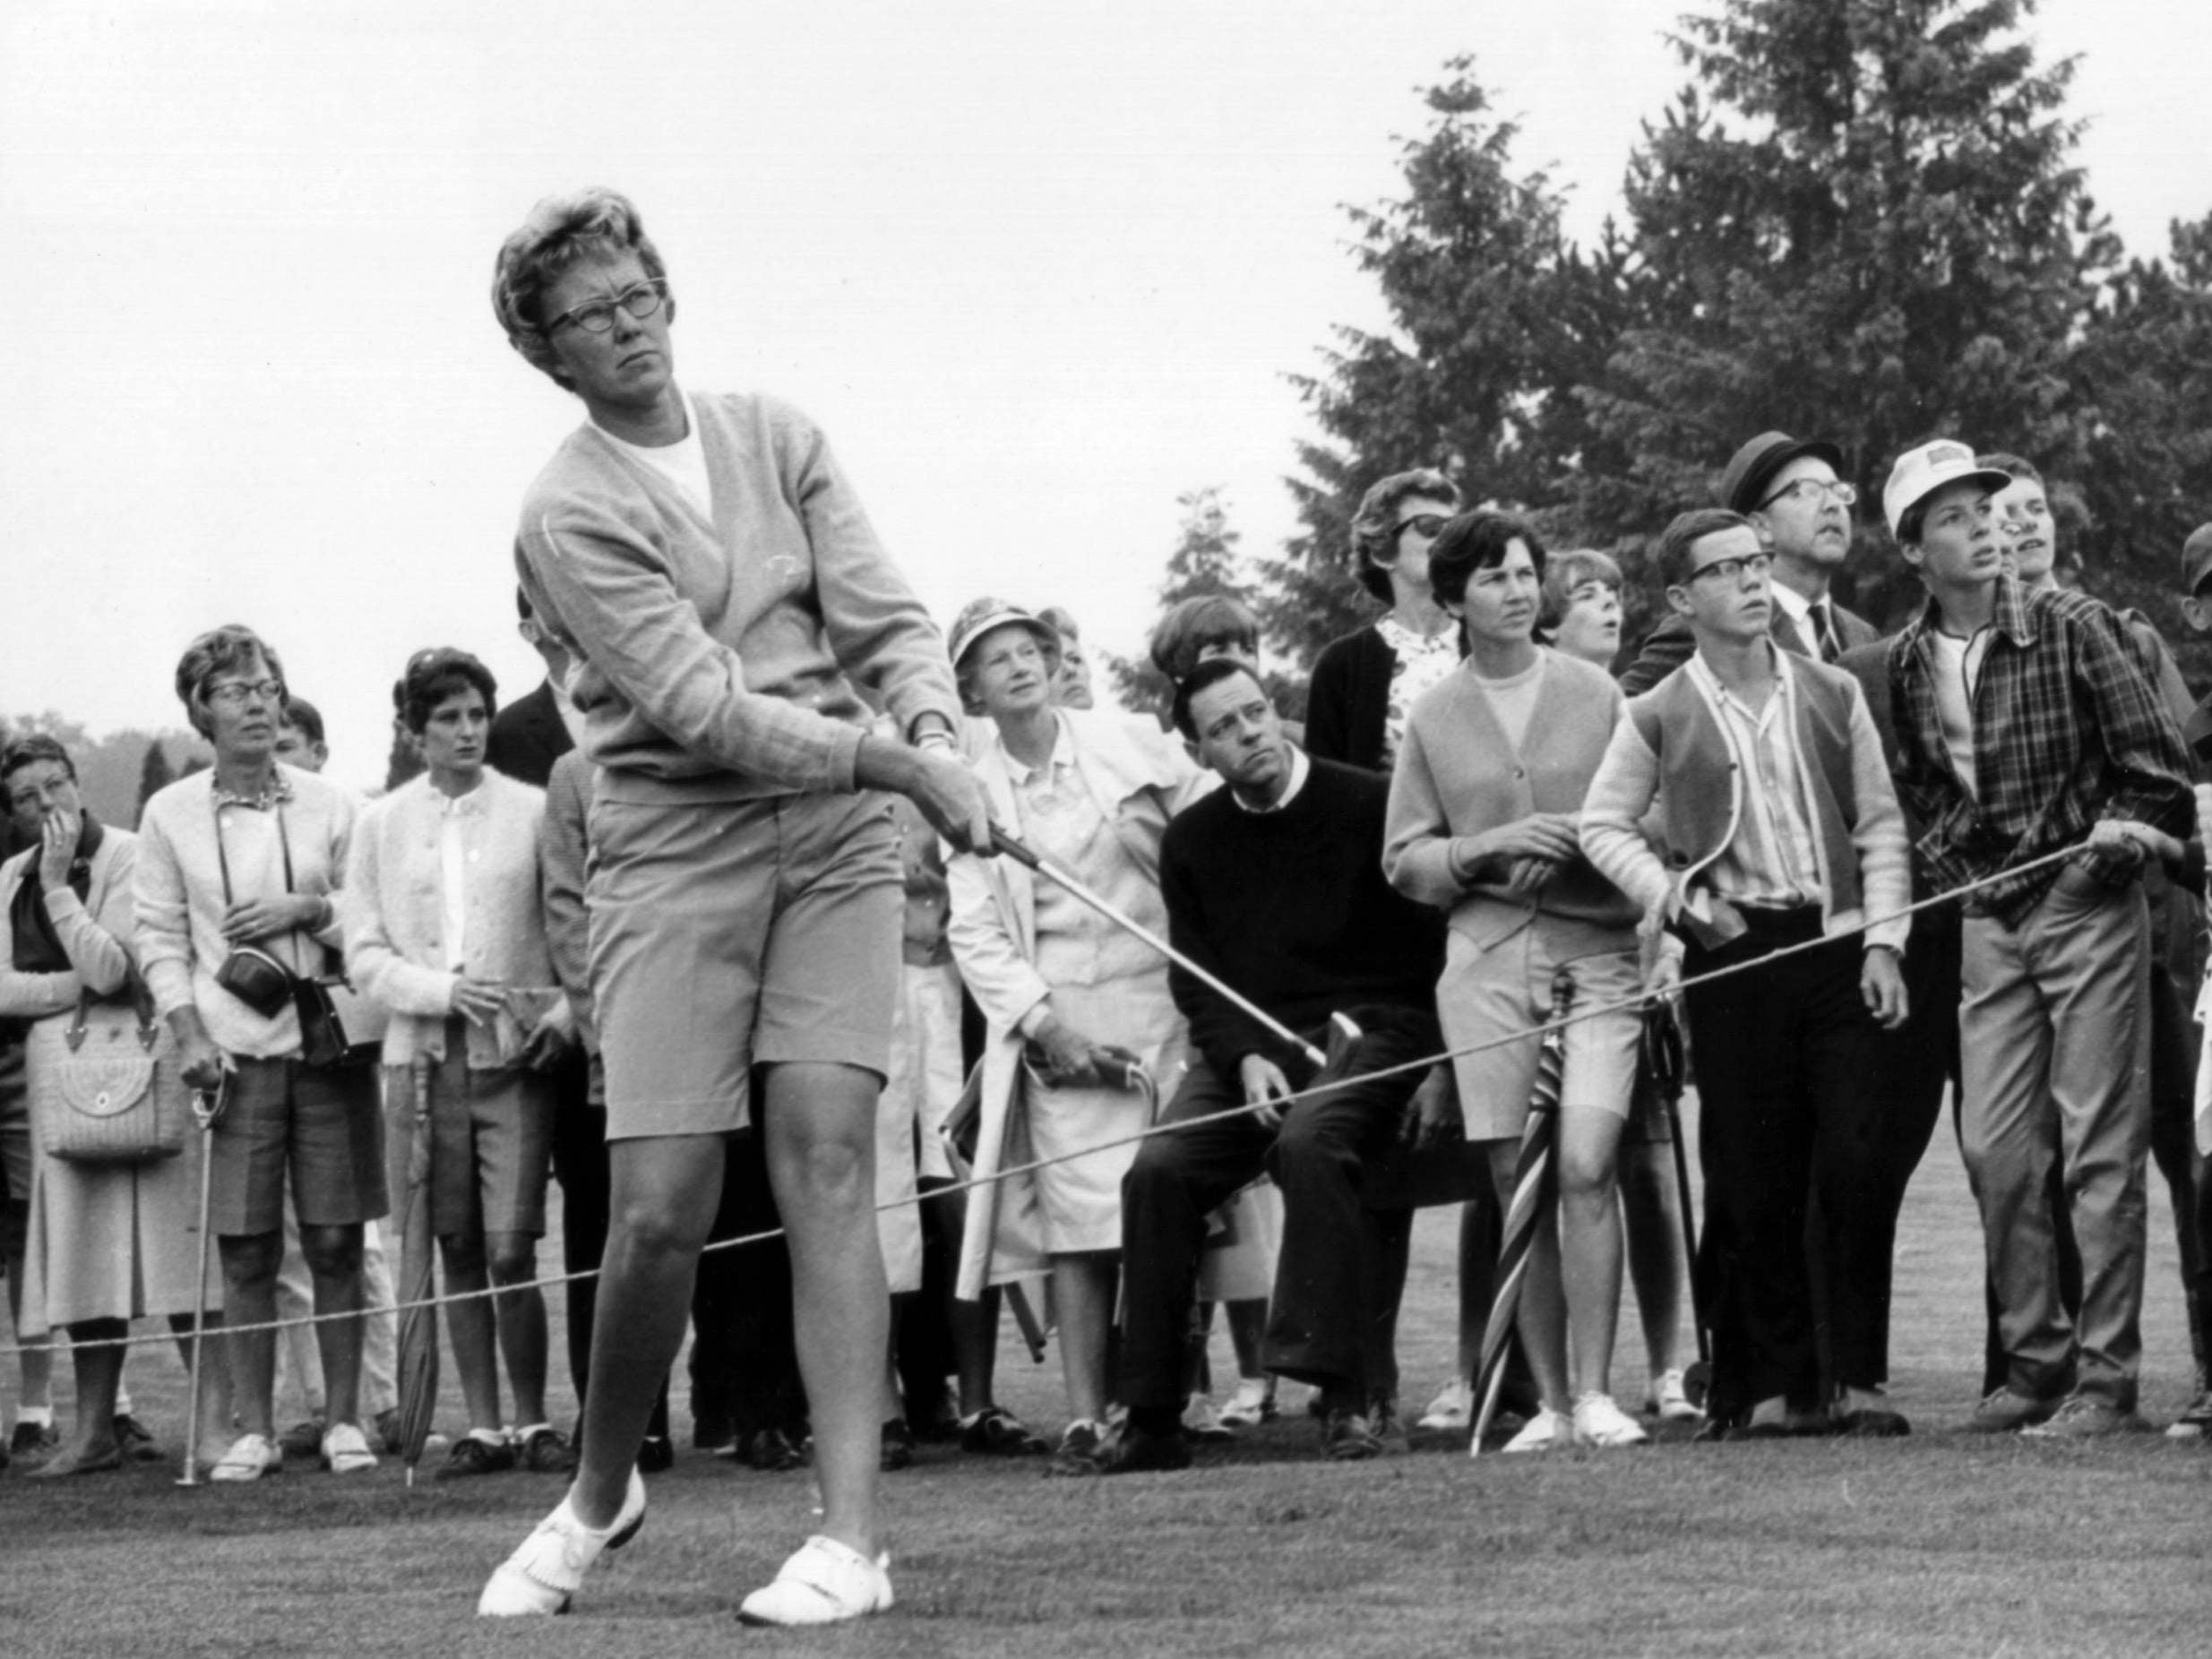 Mickey Wright, former LPGA Tour golfer, died on Monday at the age of 85